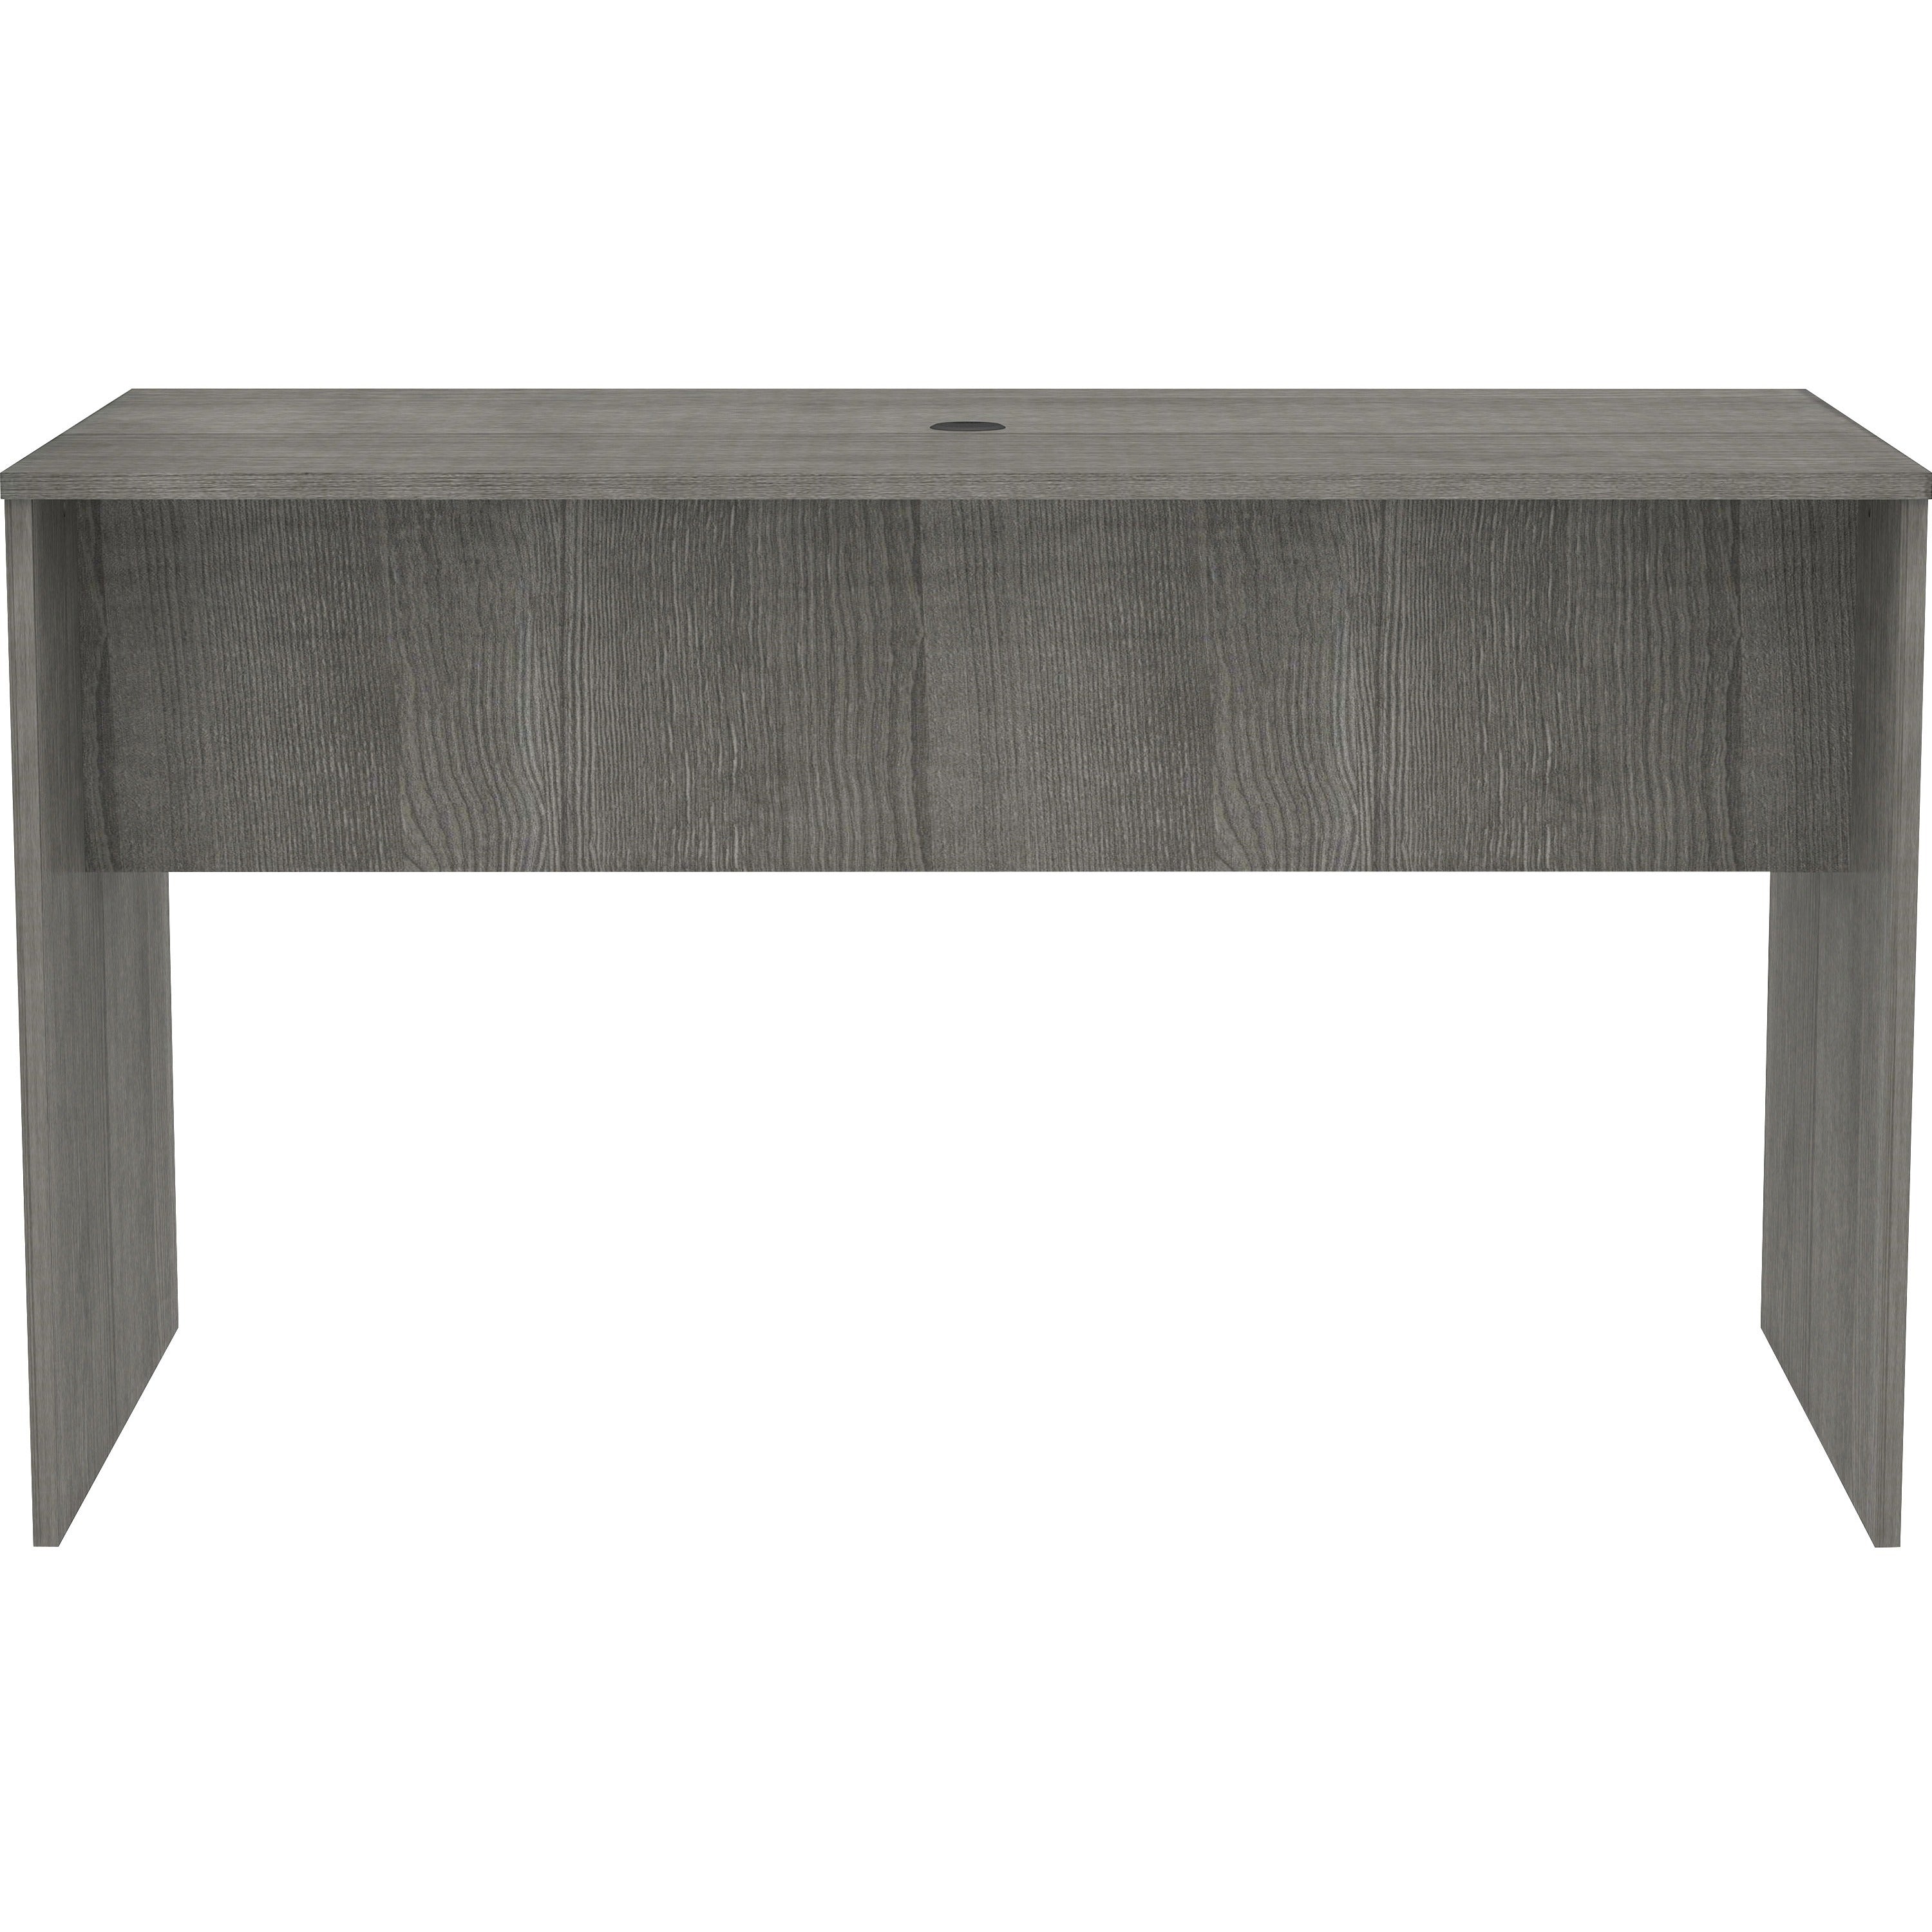 lorell-essentials-series-standing-height-table-72-x-36413-band-edge_llr69662 - 2